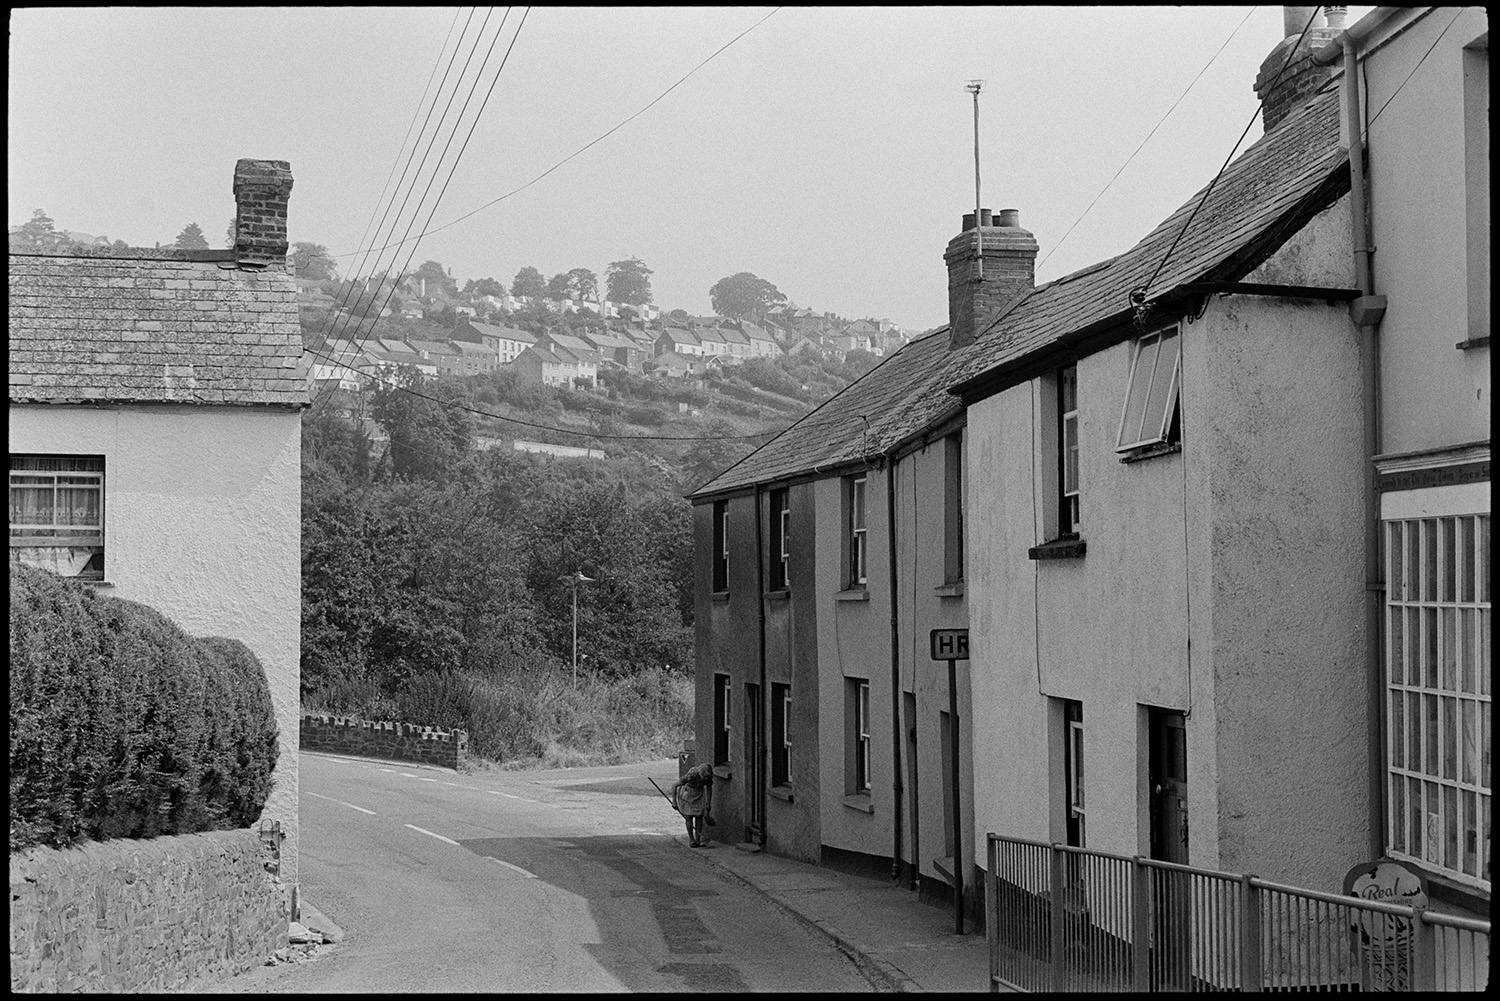 Row of cottages. 
[A road with terraced cottages in Little Torrington. A woman is sweeping outside one of the cottages. Another row of cottages can be seen on a hill in the background.]